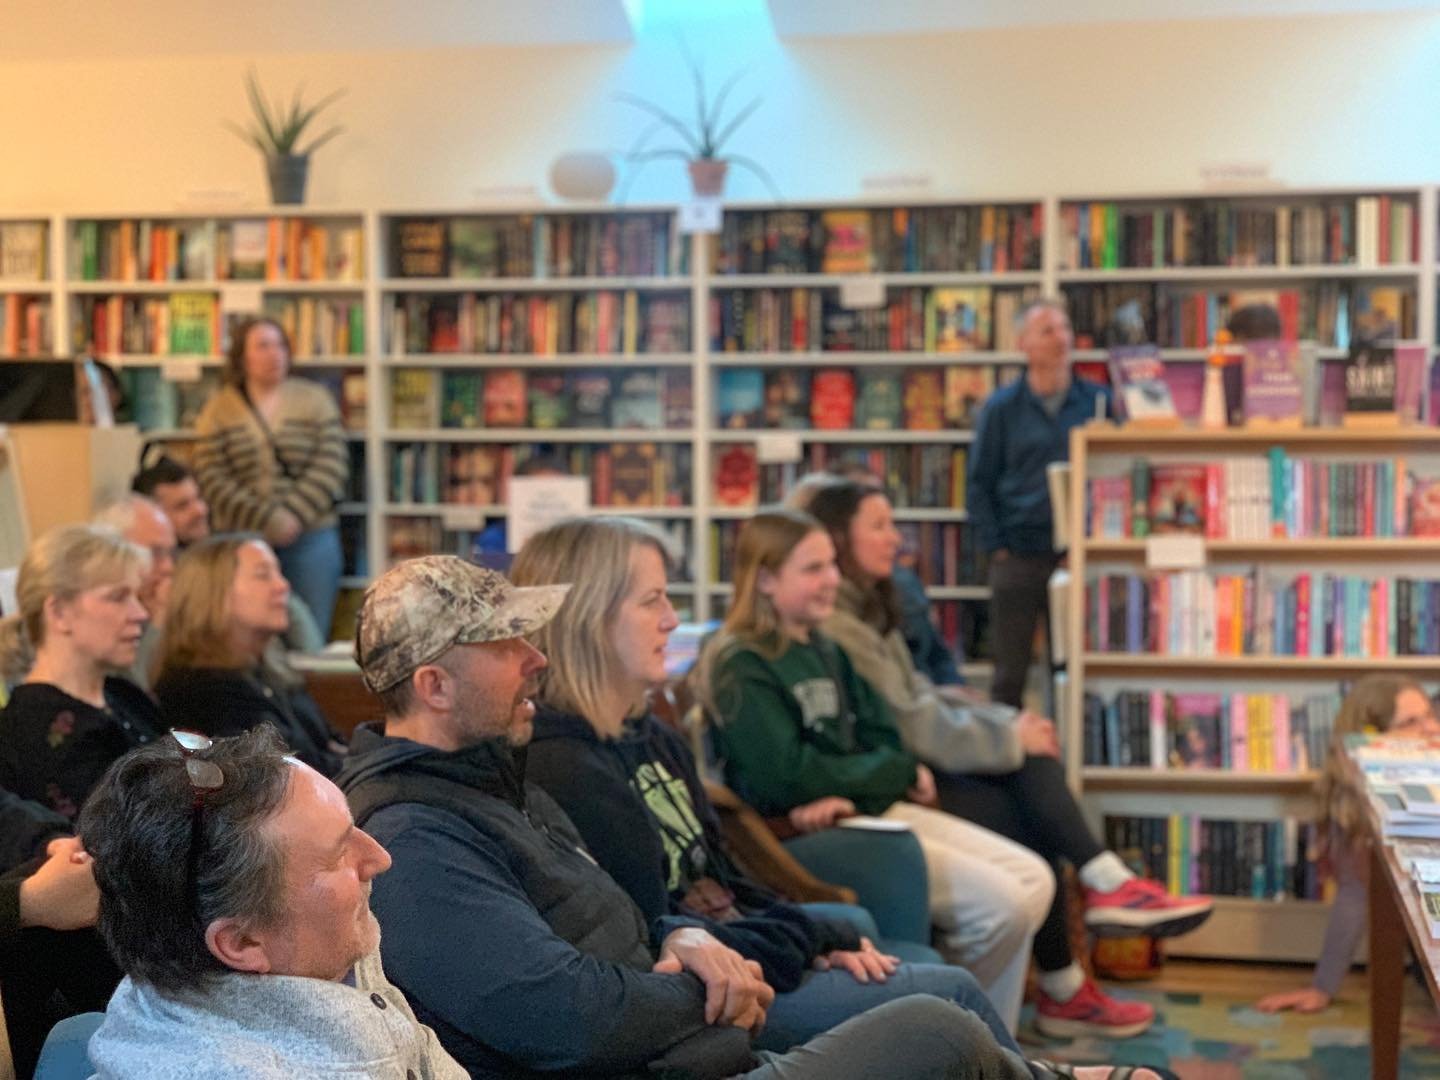 Are you a storyteller? Poet? Singer? Looking for an open mic to practice a new comedy routine? 🎤 Big Hill Books&rsquo; open mic is coming up on Saturday the 18th. We had such a fantastic turn out last month with singing groups, local authors, and ev